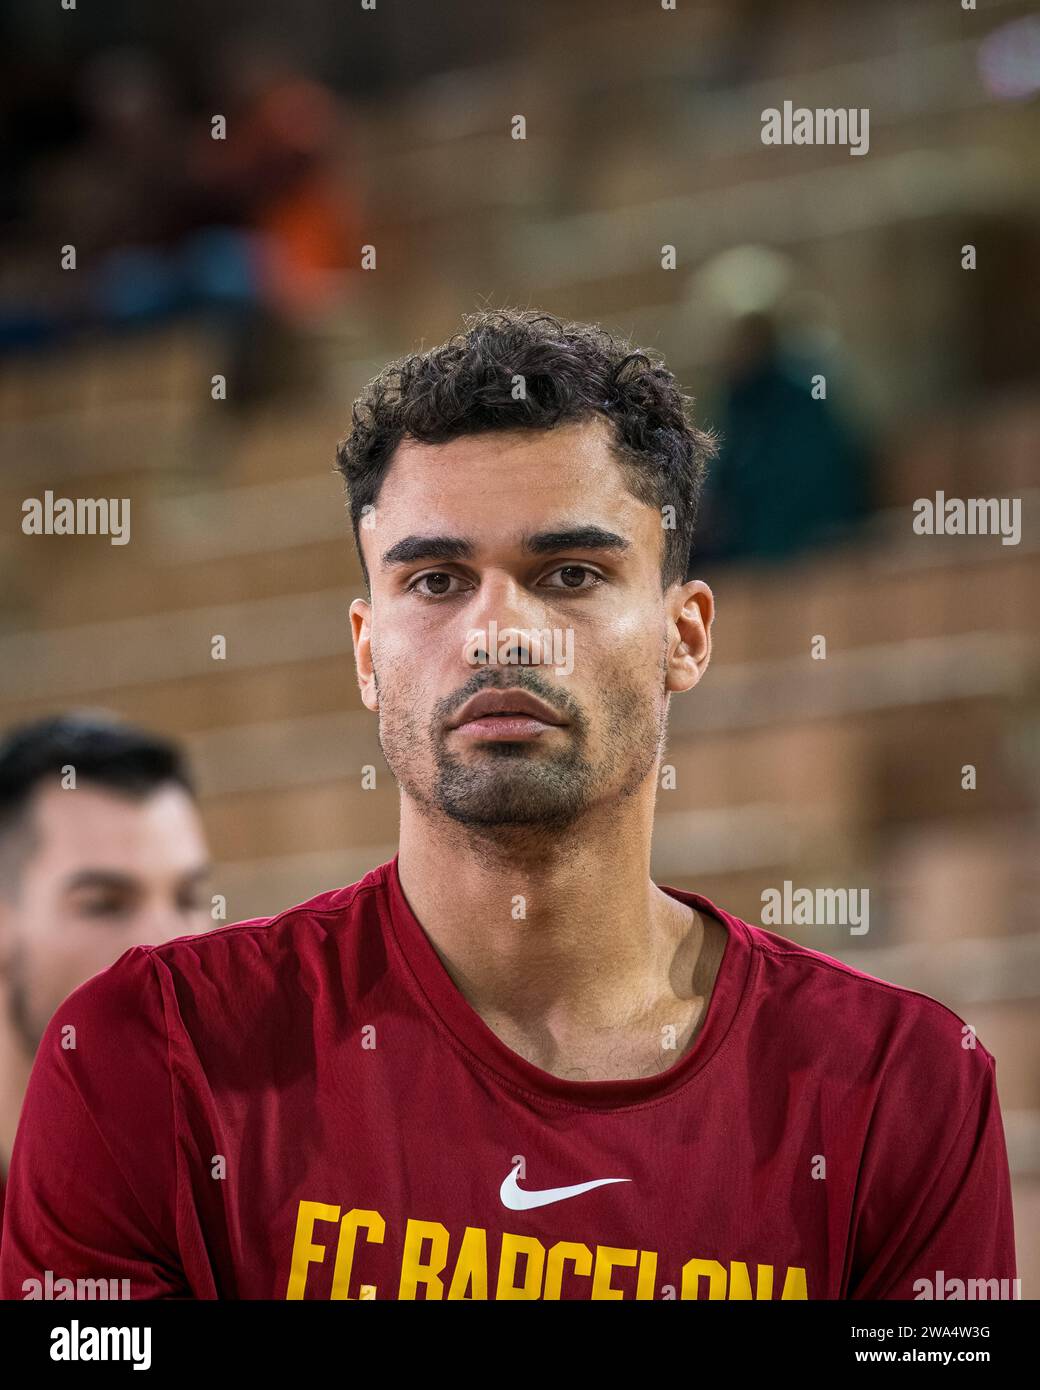 Monaco, Monaco. 29th Dec, 2023. Barcelona #1 Oscar da Silva is seen in action ahead of the match for the 17th round of the Turkish Airlines Euroleague between AS Monaco and FC Barcelona at the Salle Gaston-Medecin in Monaco, on December 29, 2023. Photo by Laurent Coust/ABACAPRESS.COM Credit: Abaca Press/Alamy Live News Stock Photo